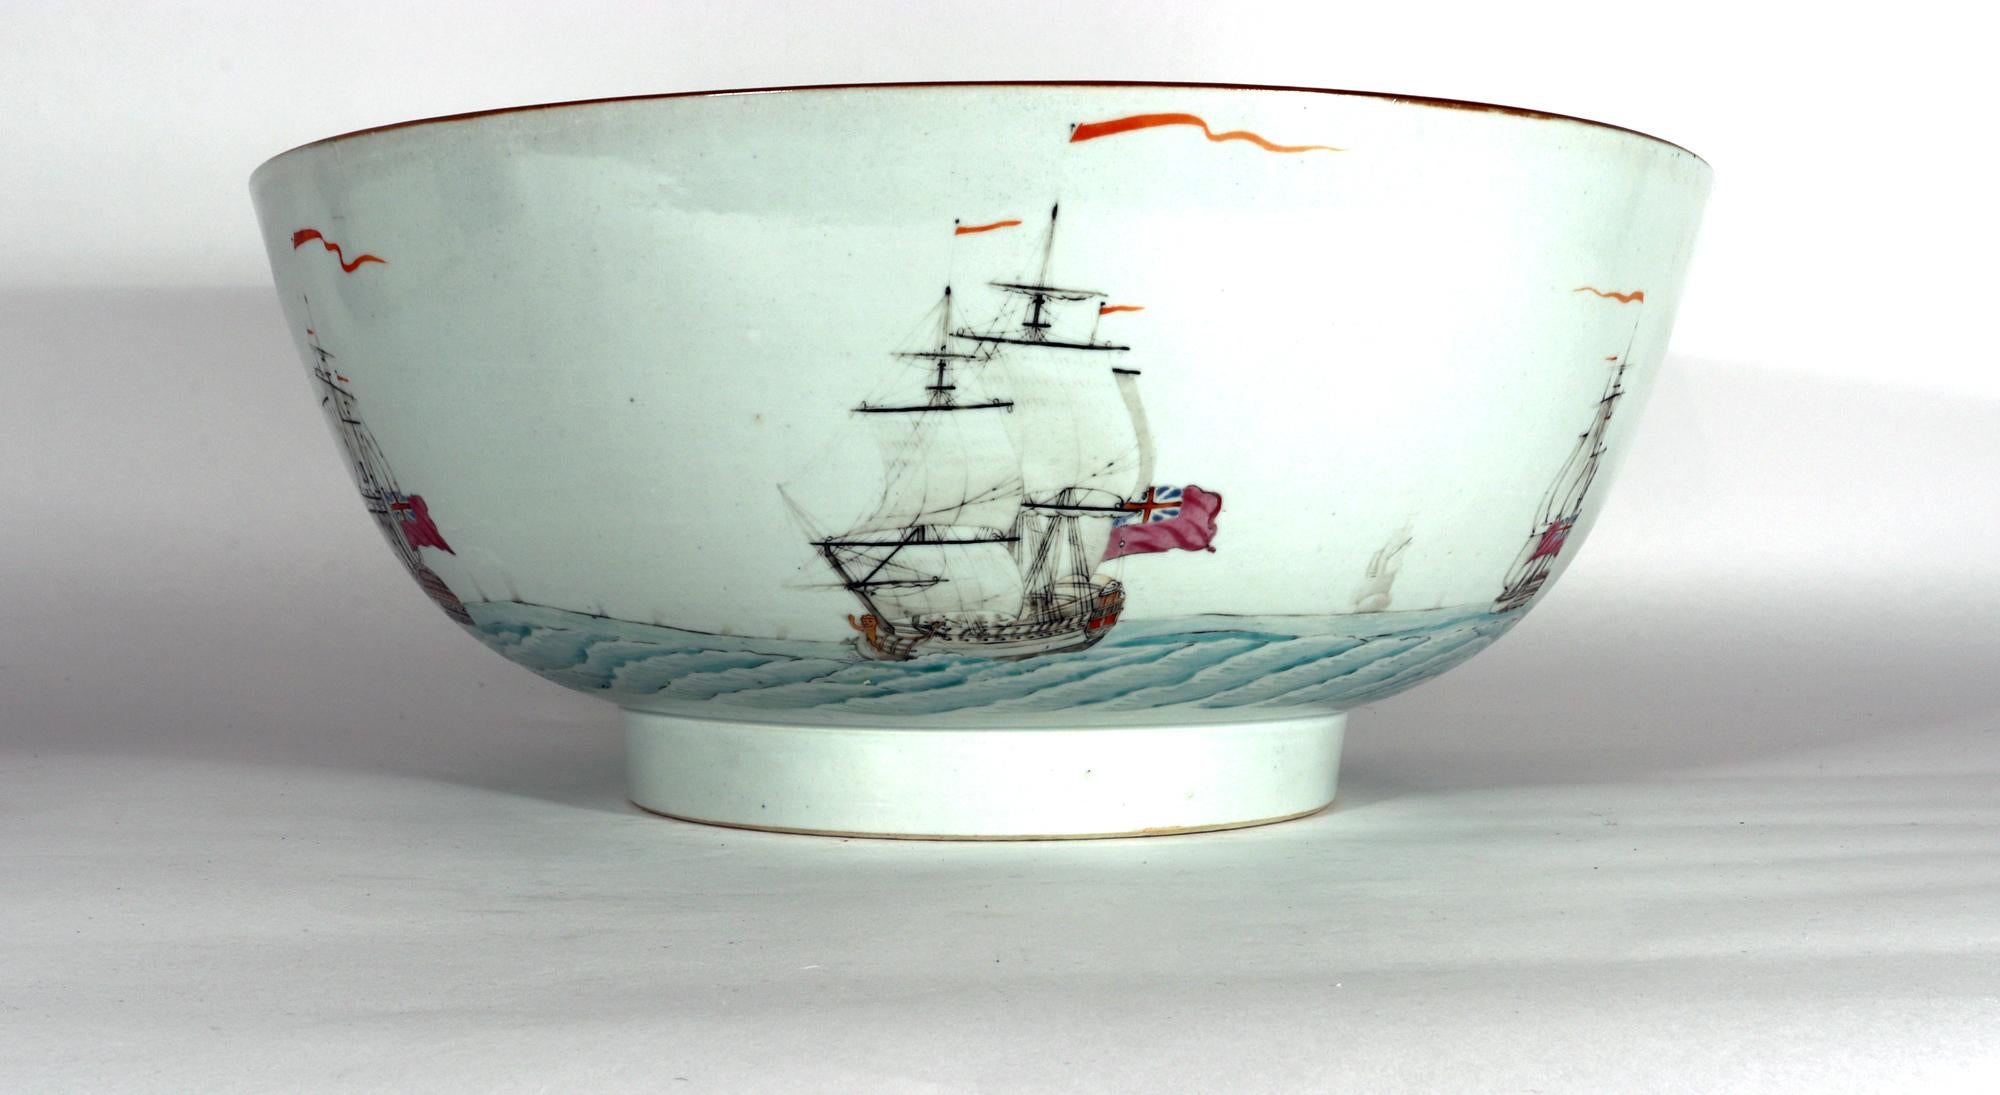 Chinese Export Porcelain Large Punch bowl,
Painted with Marine Subject Images of A Royal Navy Fleet of Ships

A remarkable large 